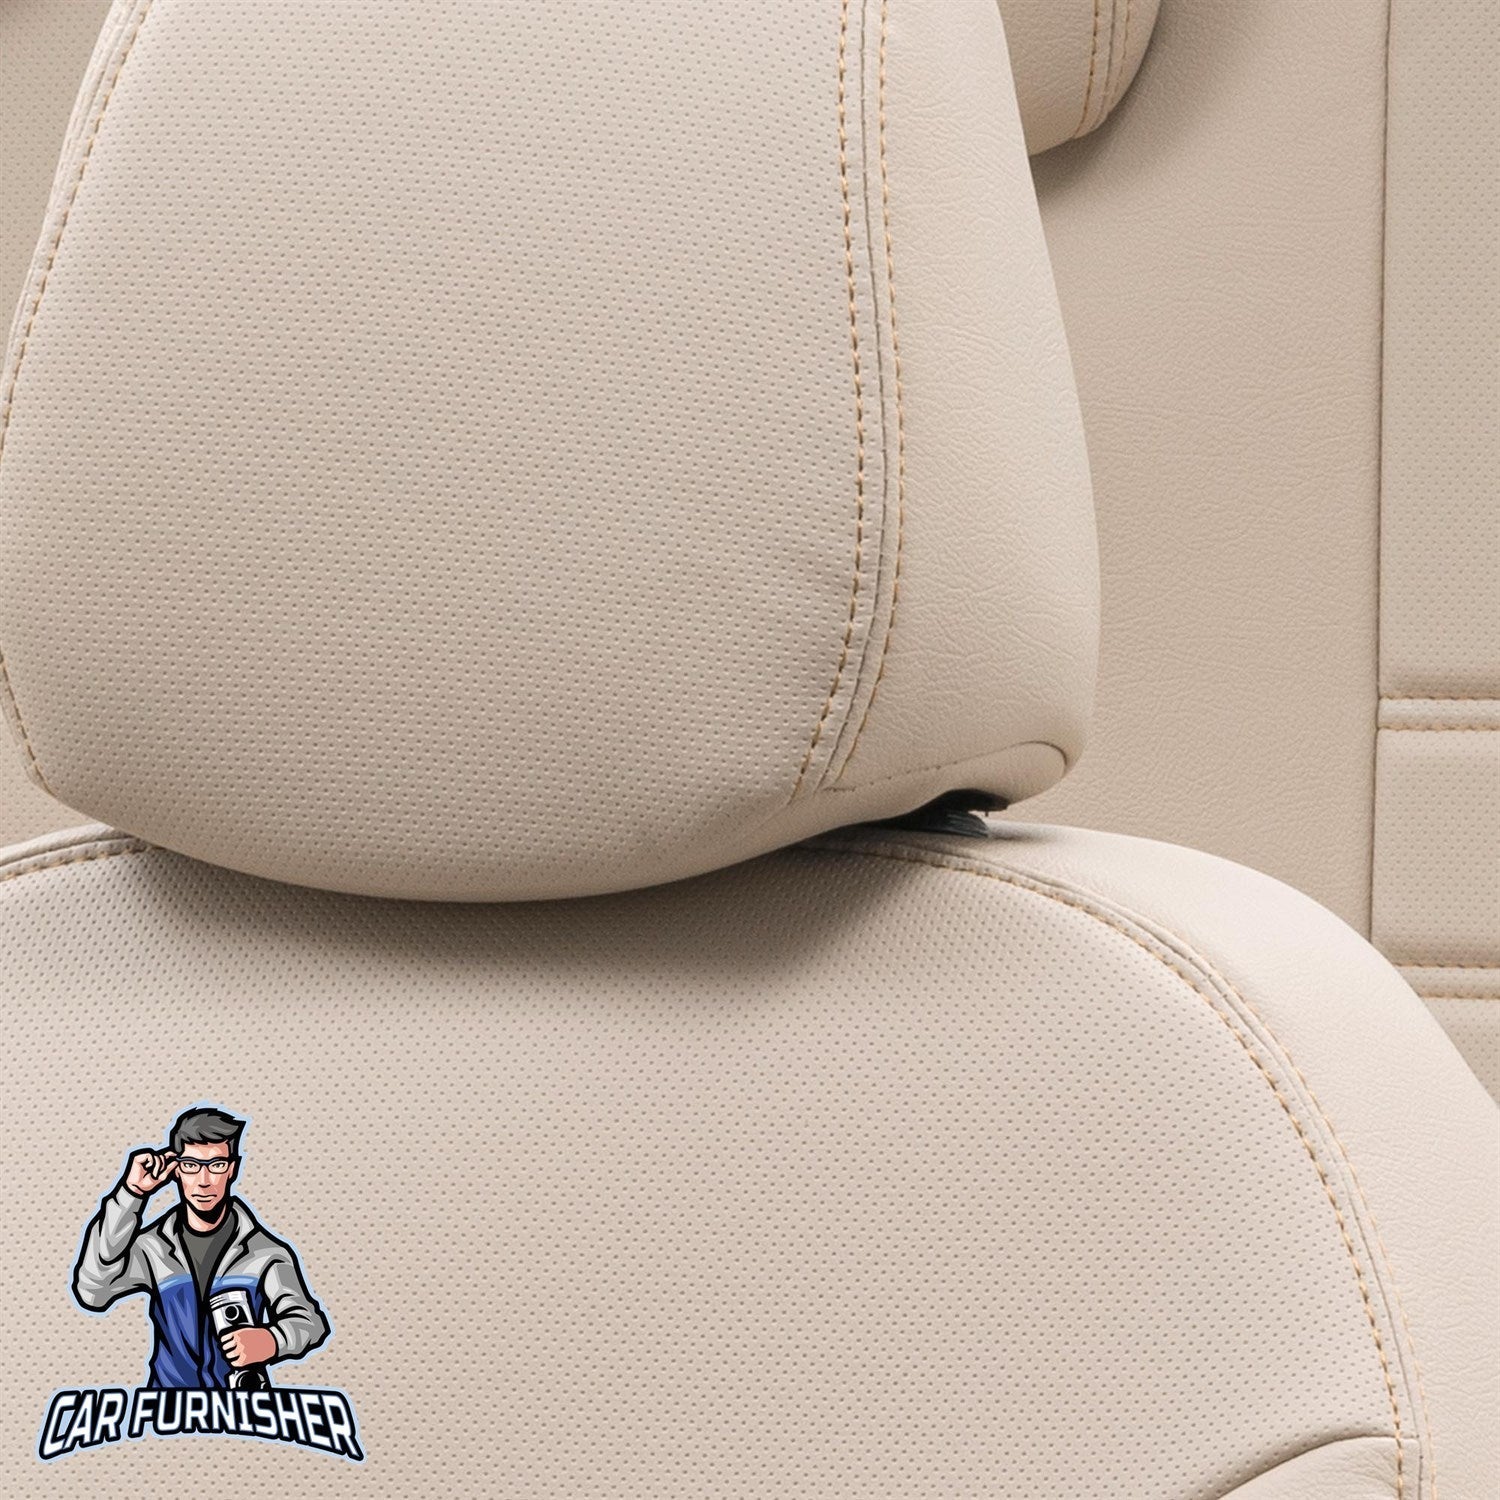 Renault Captur Seat Covers Istanbul Leather Design Beige Leather